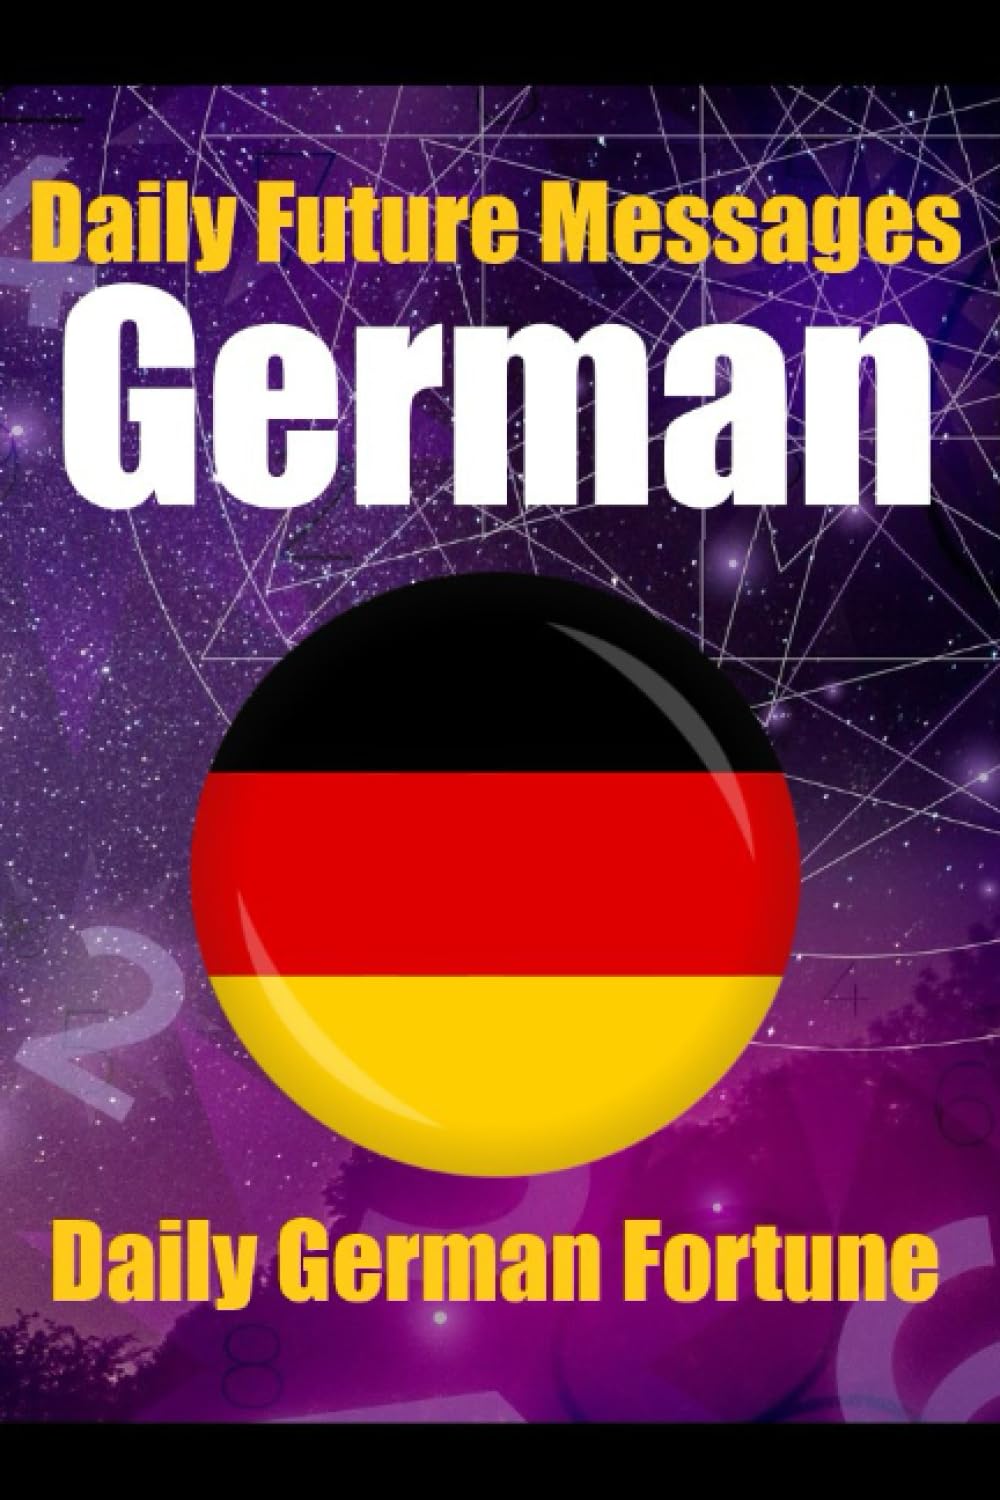 Fortune in German Words | Daily Random Future Messages - Skriuwer.com